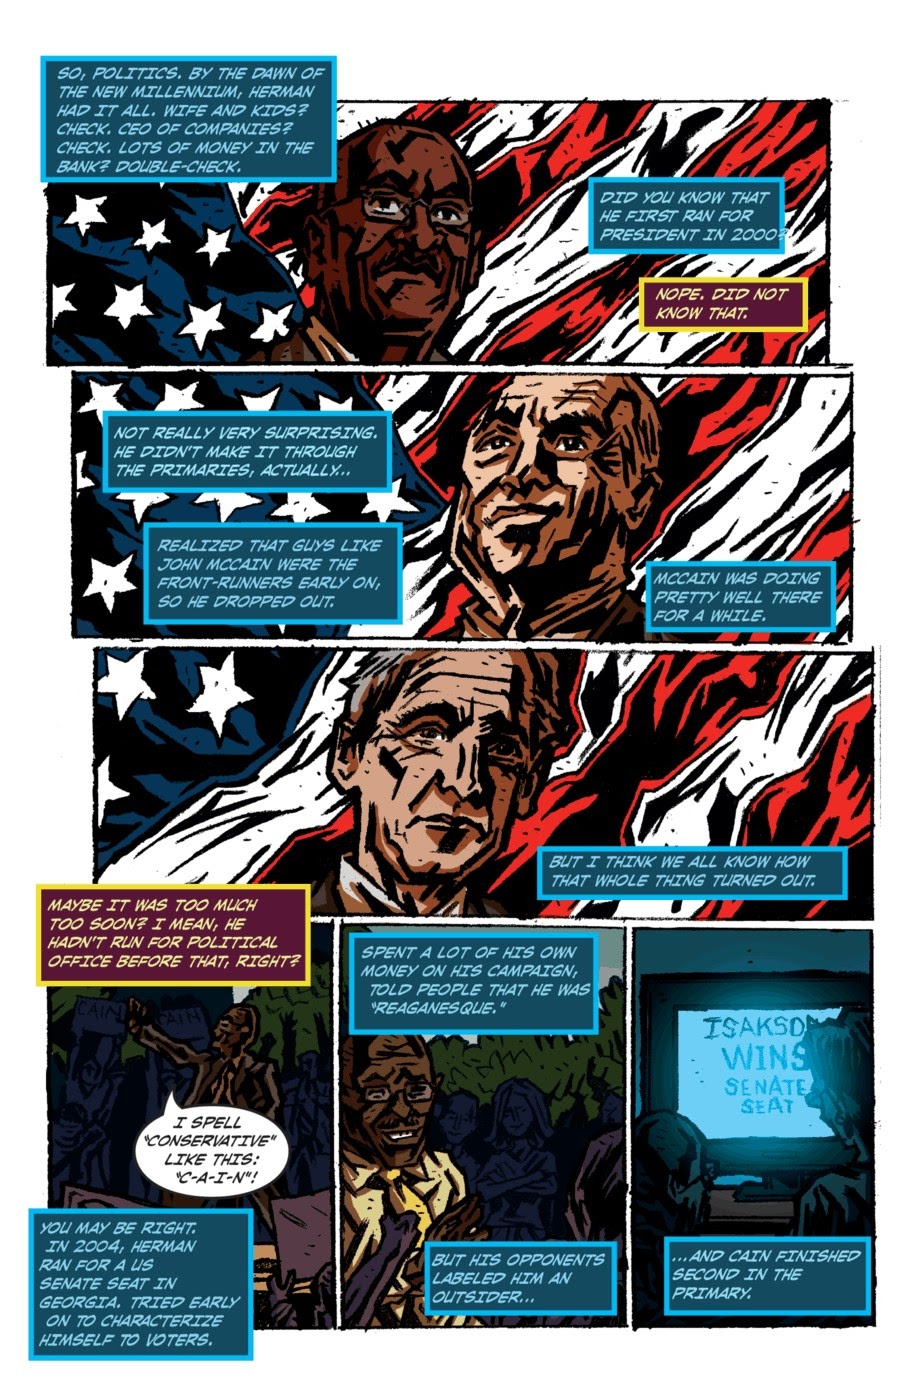 Read online Political Power: Herman Cain comic -  Issue # Full - 14